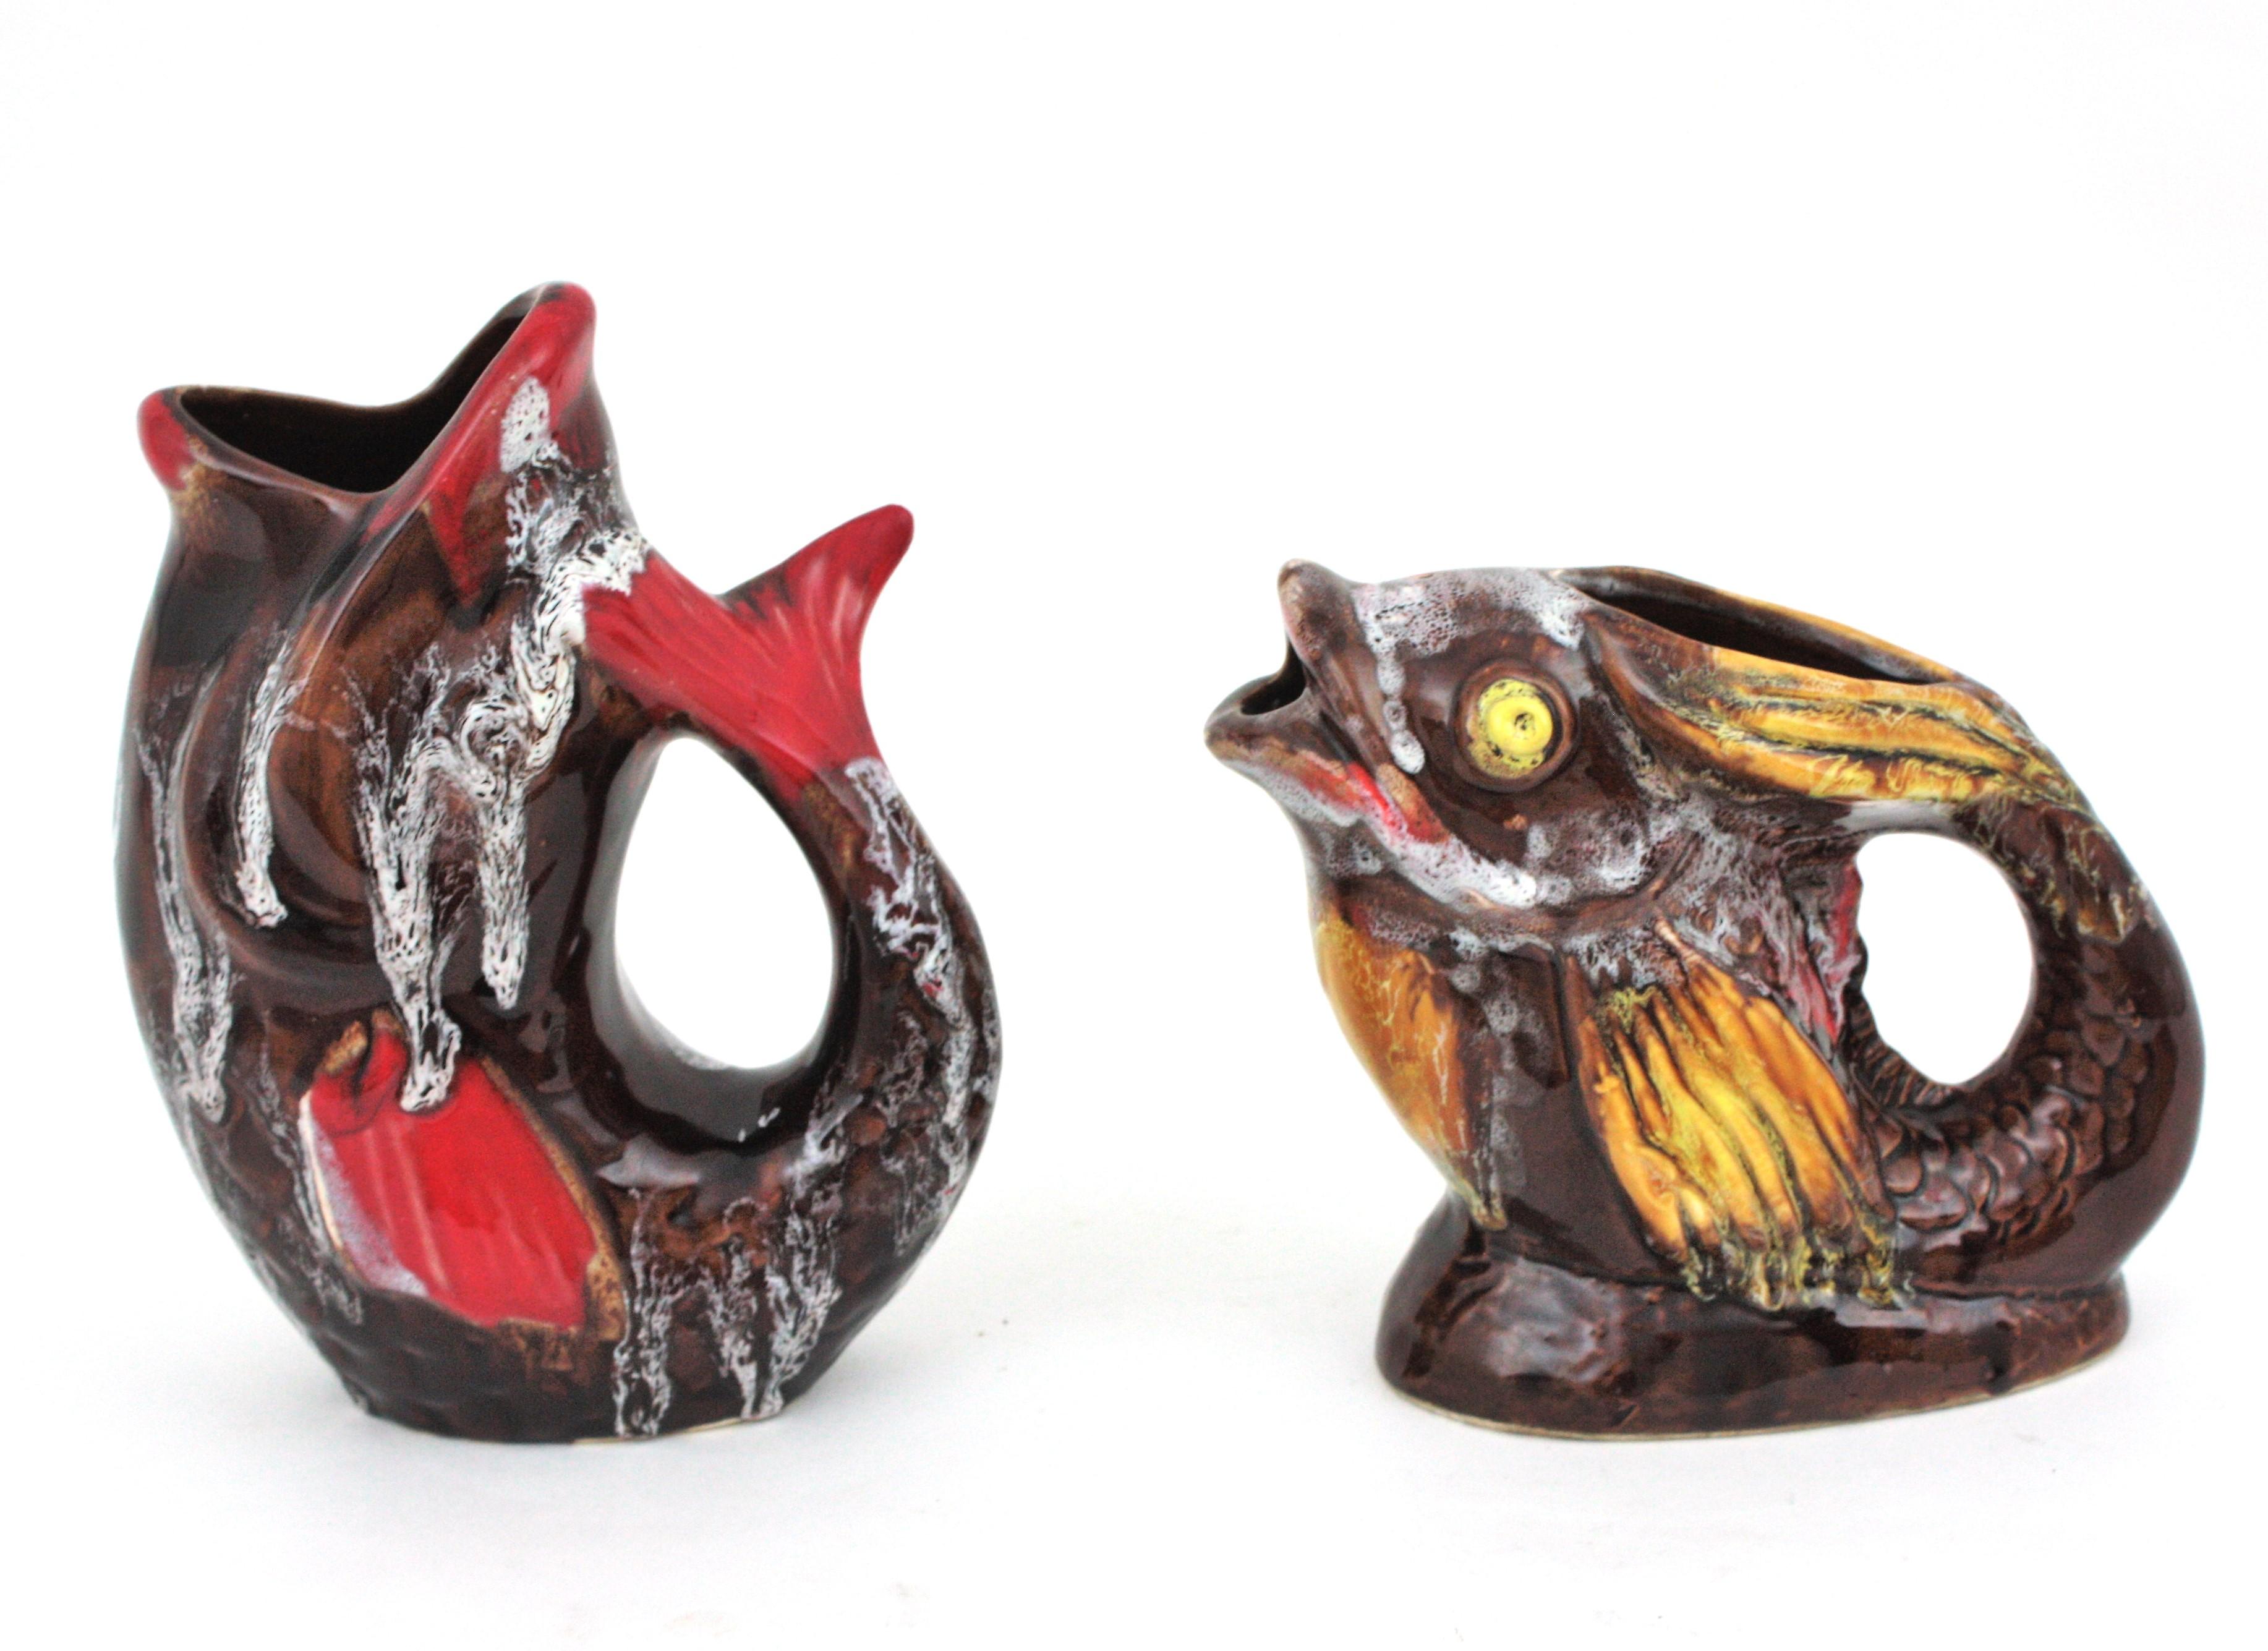 Unmatching pair of Modernist glazed ceramic gurgling fish water jugs / pitchers by Vallauris, France, 1950s-1960s
Eye-catching hand painted fat lava gurgle fish vases in brown glazed ceramic with yellow, white and red accents. 
The large fish glug